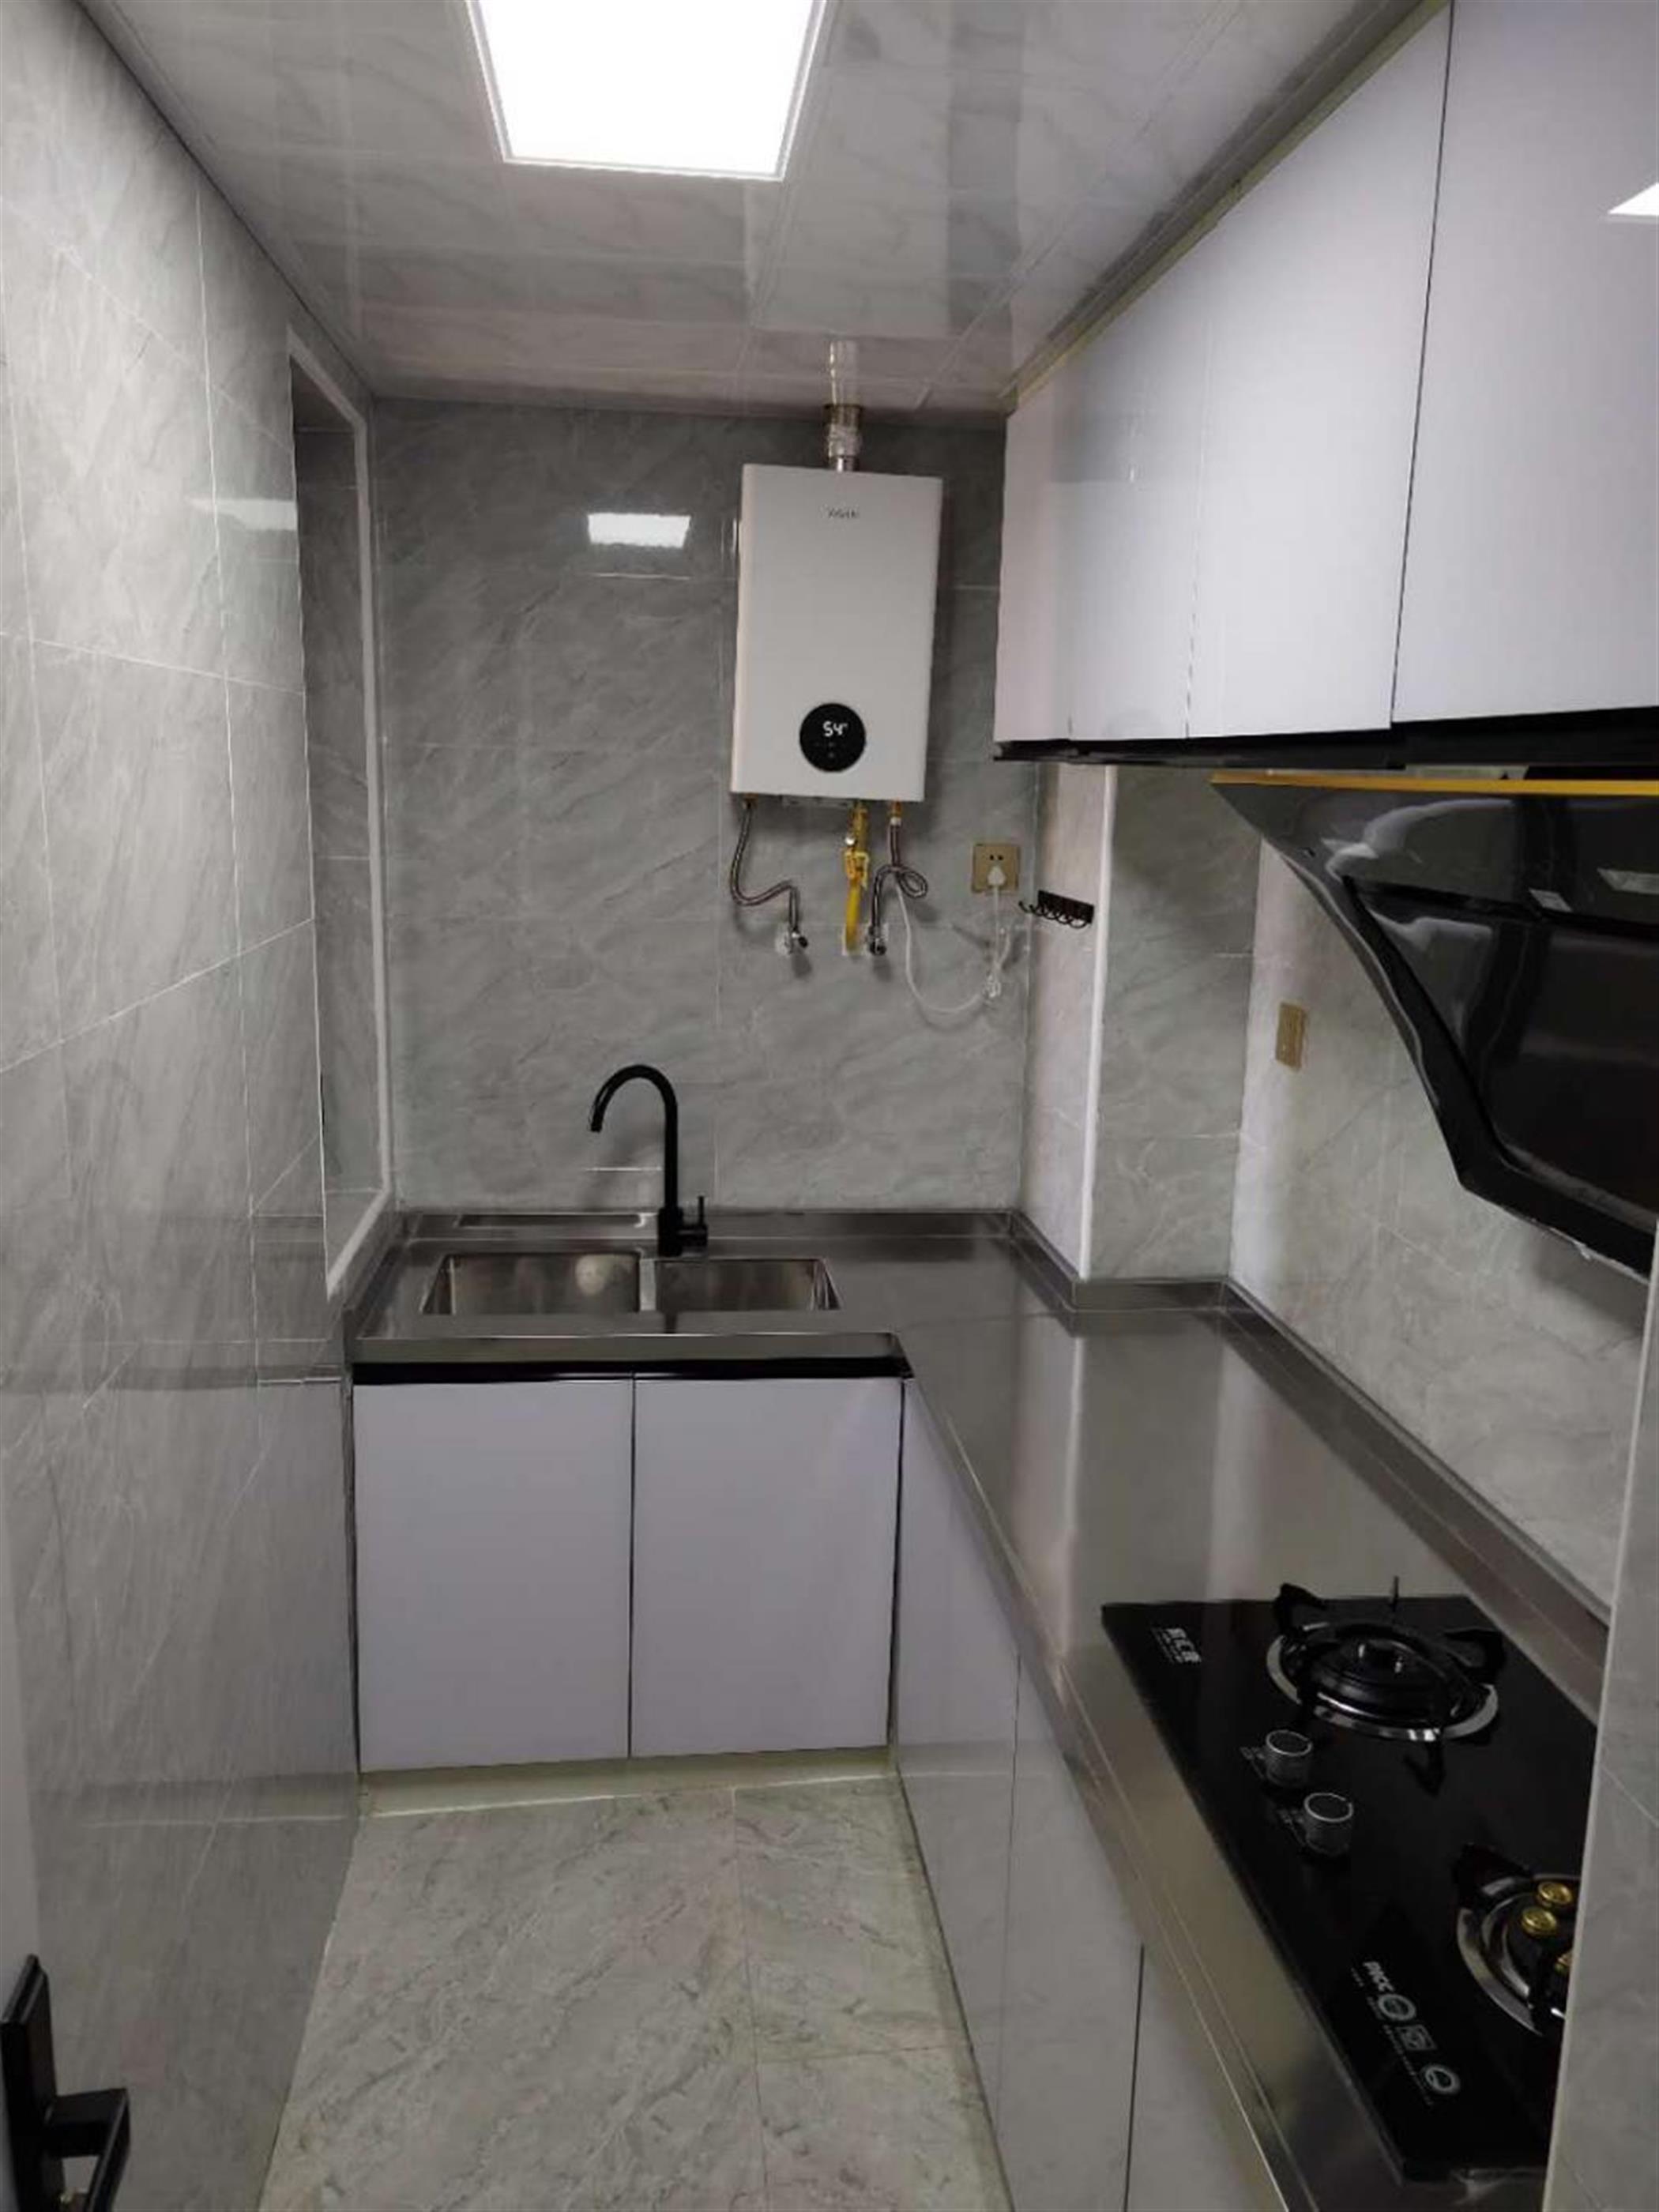 Clean Kitchen Newly Renovated Affordable Cozy 50sqm 1BR Apartment for Rent in Zhabei Shanghai